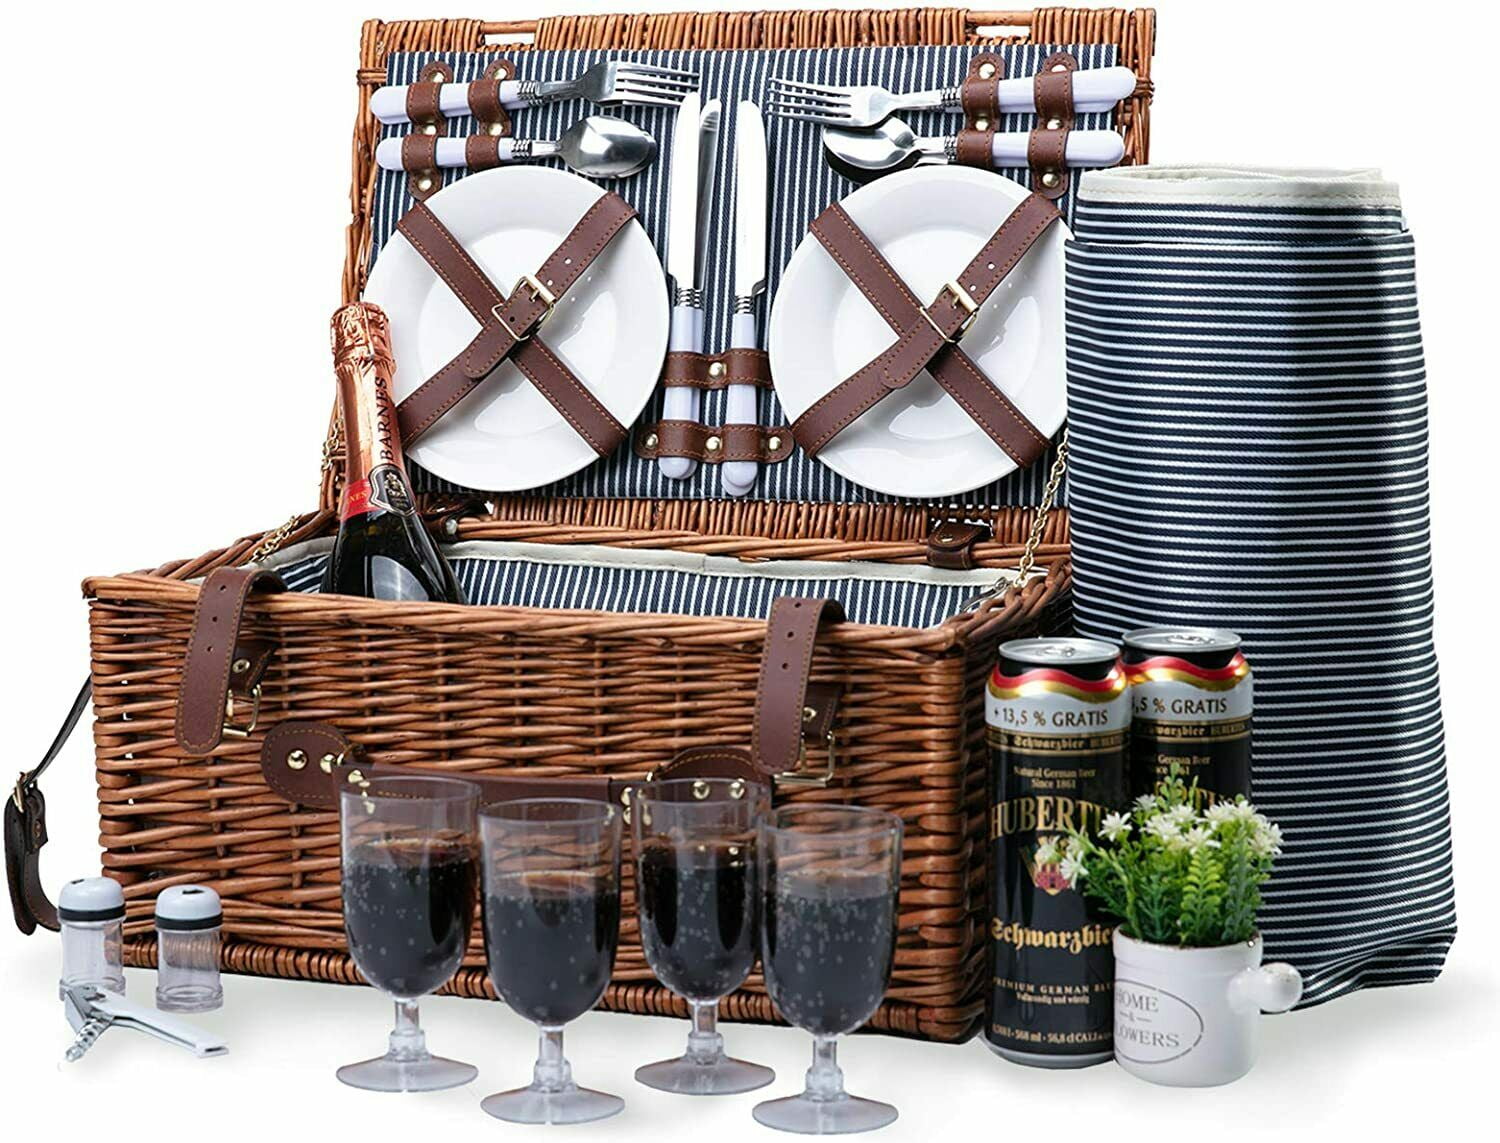 HappyPicnic Wicker Picnic Basket Set for 4 Persons Free Waterproof Blanket and Cutlery Service Kit-Classical Brown Large Willow Hamper with Large Insulated Cooler Compartment 